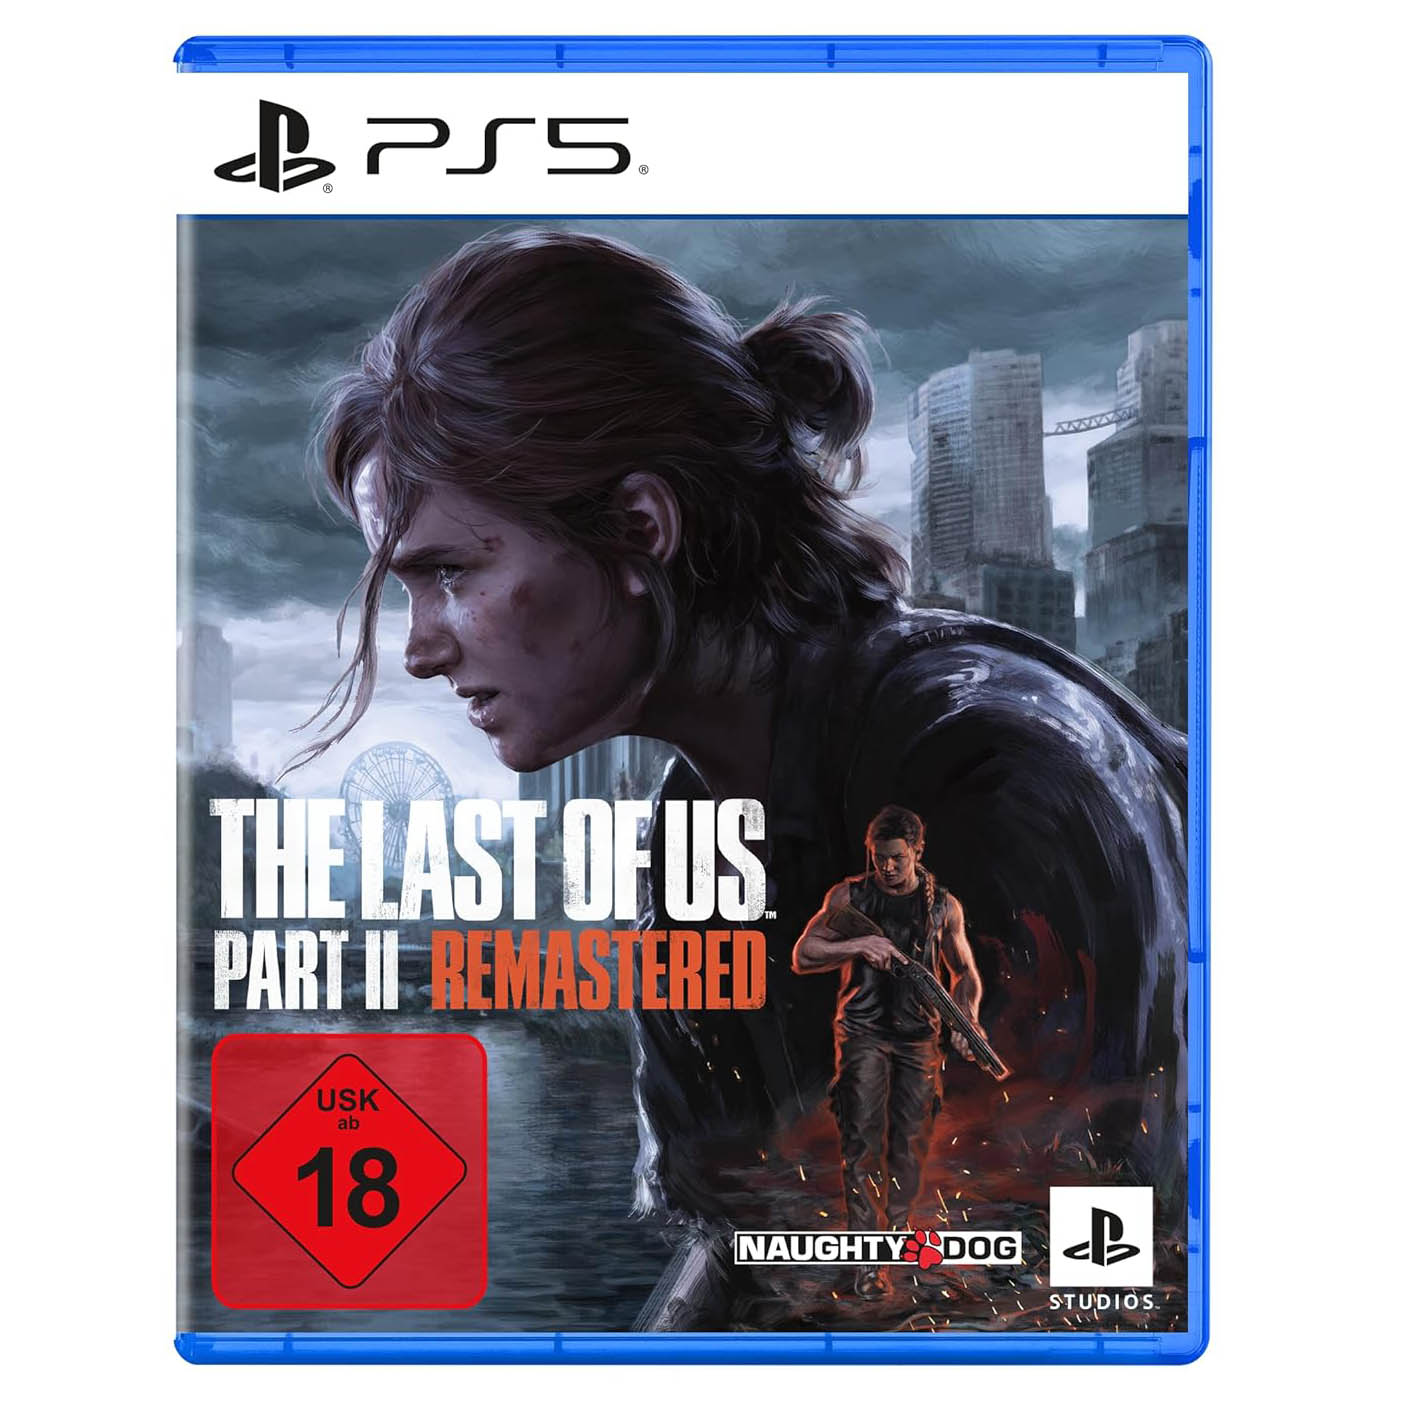 The Last of Us<br>Part 2 Remastered